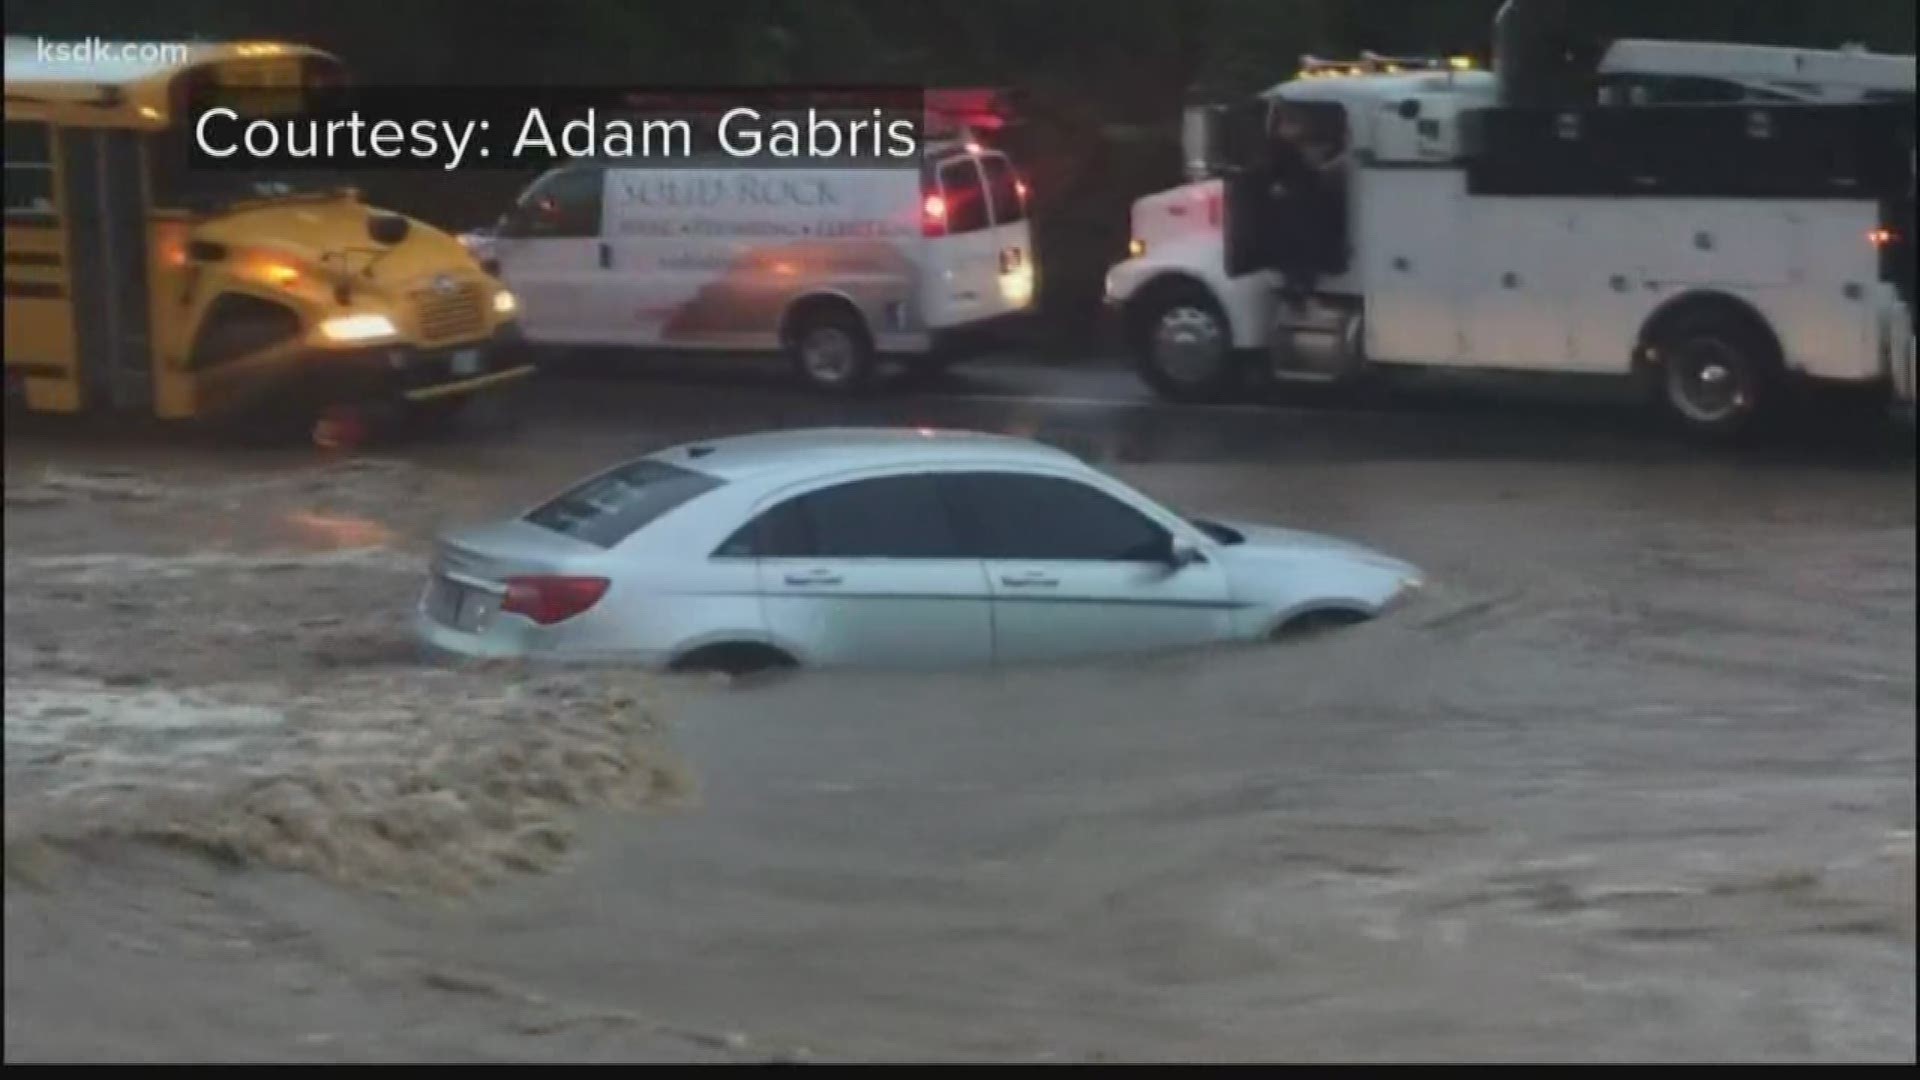 Along Highway 109, drivers watched as a car was swept away by flash flooding along the roadway.